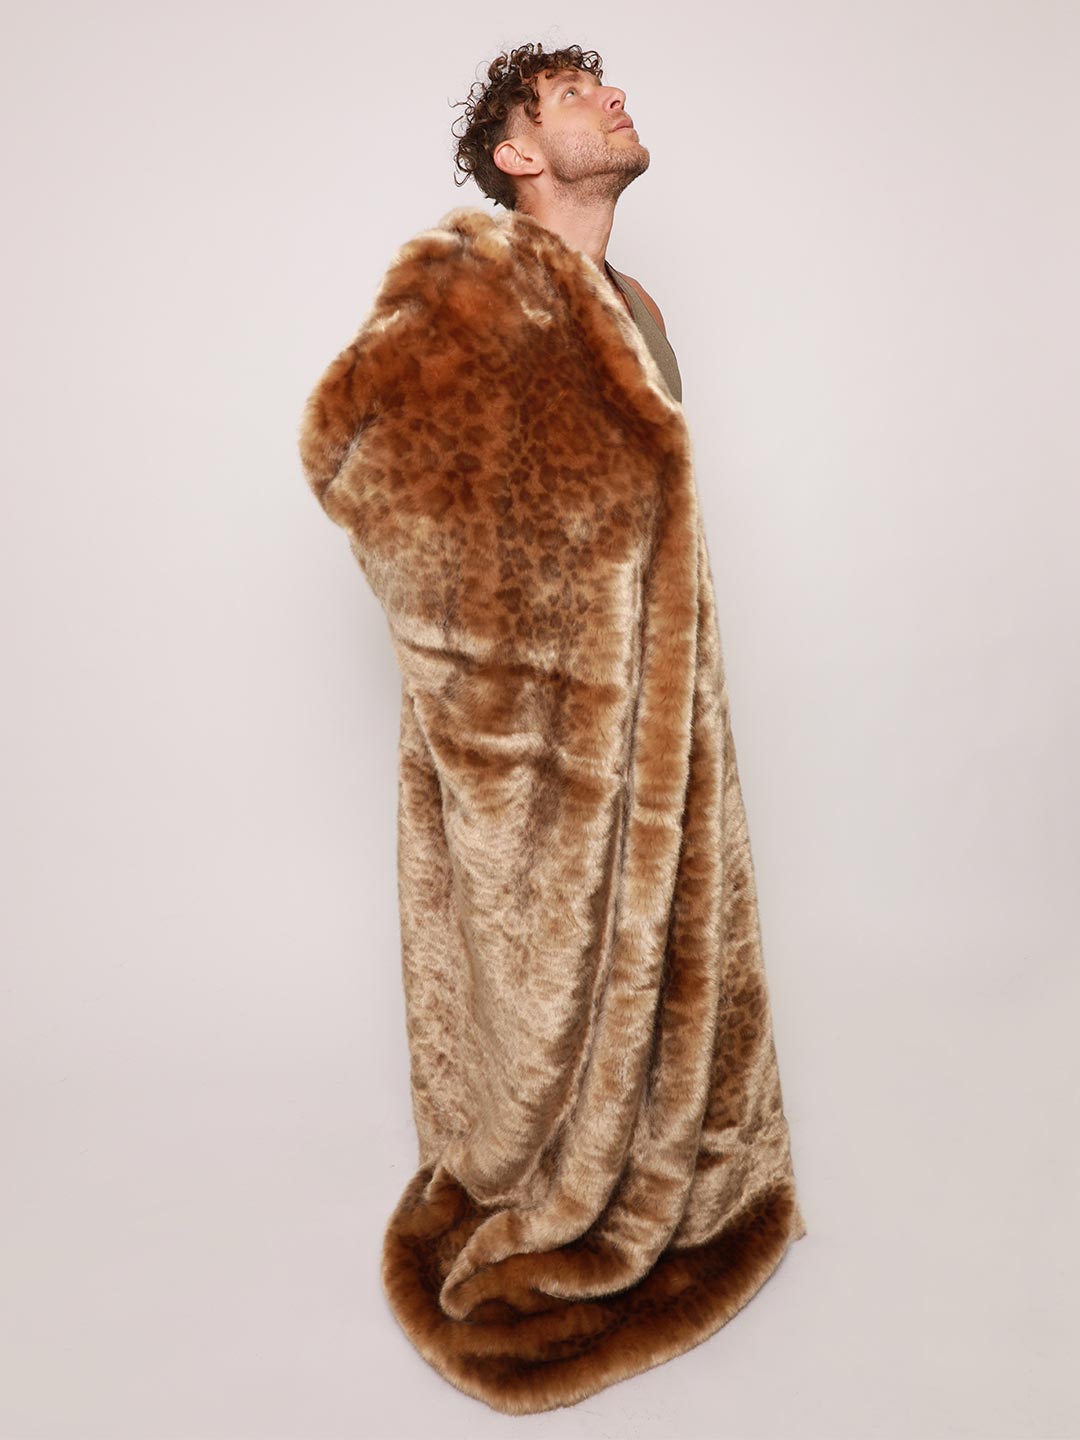 Man Holding Luxe Faux Fur Throw in African Golden Cat Design